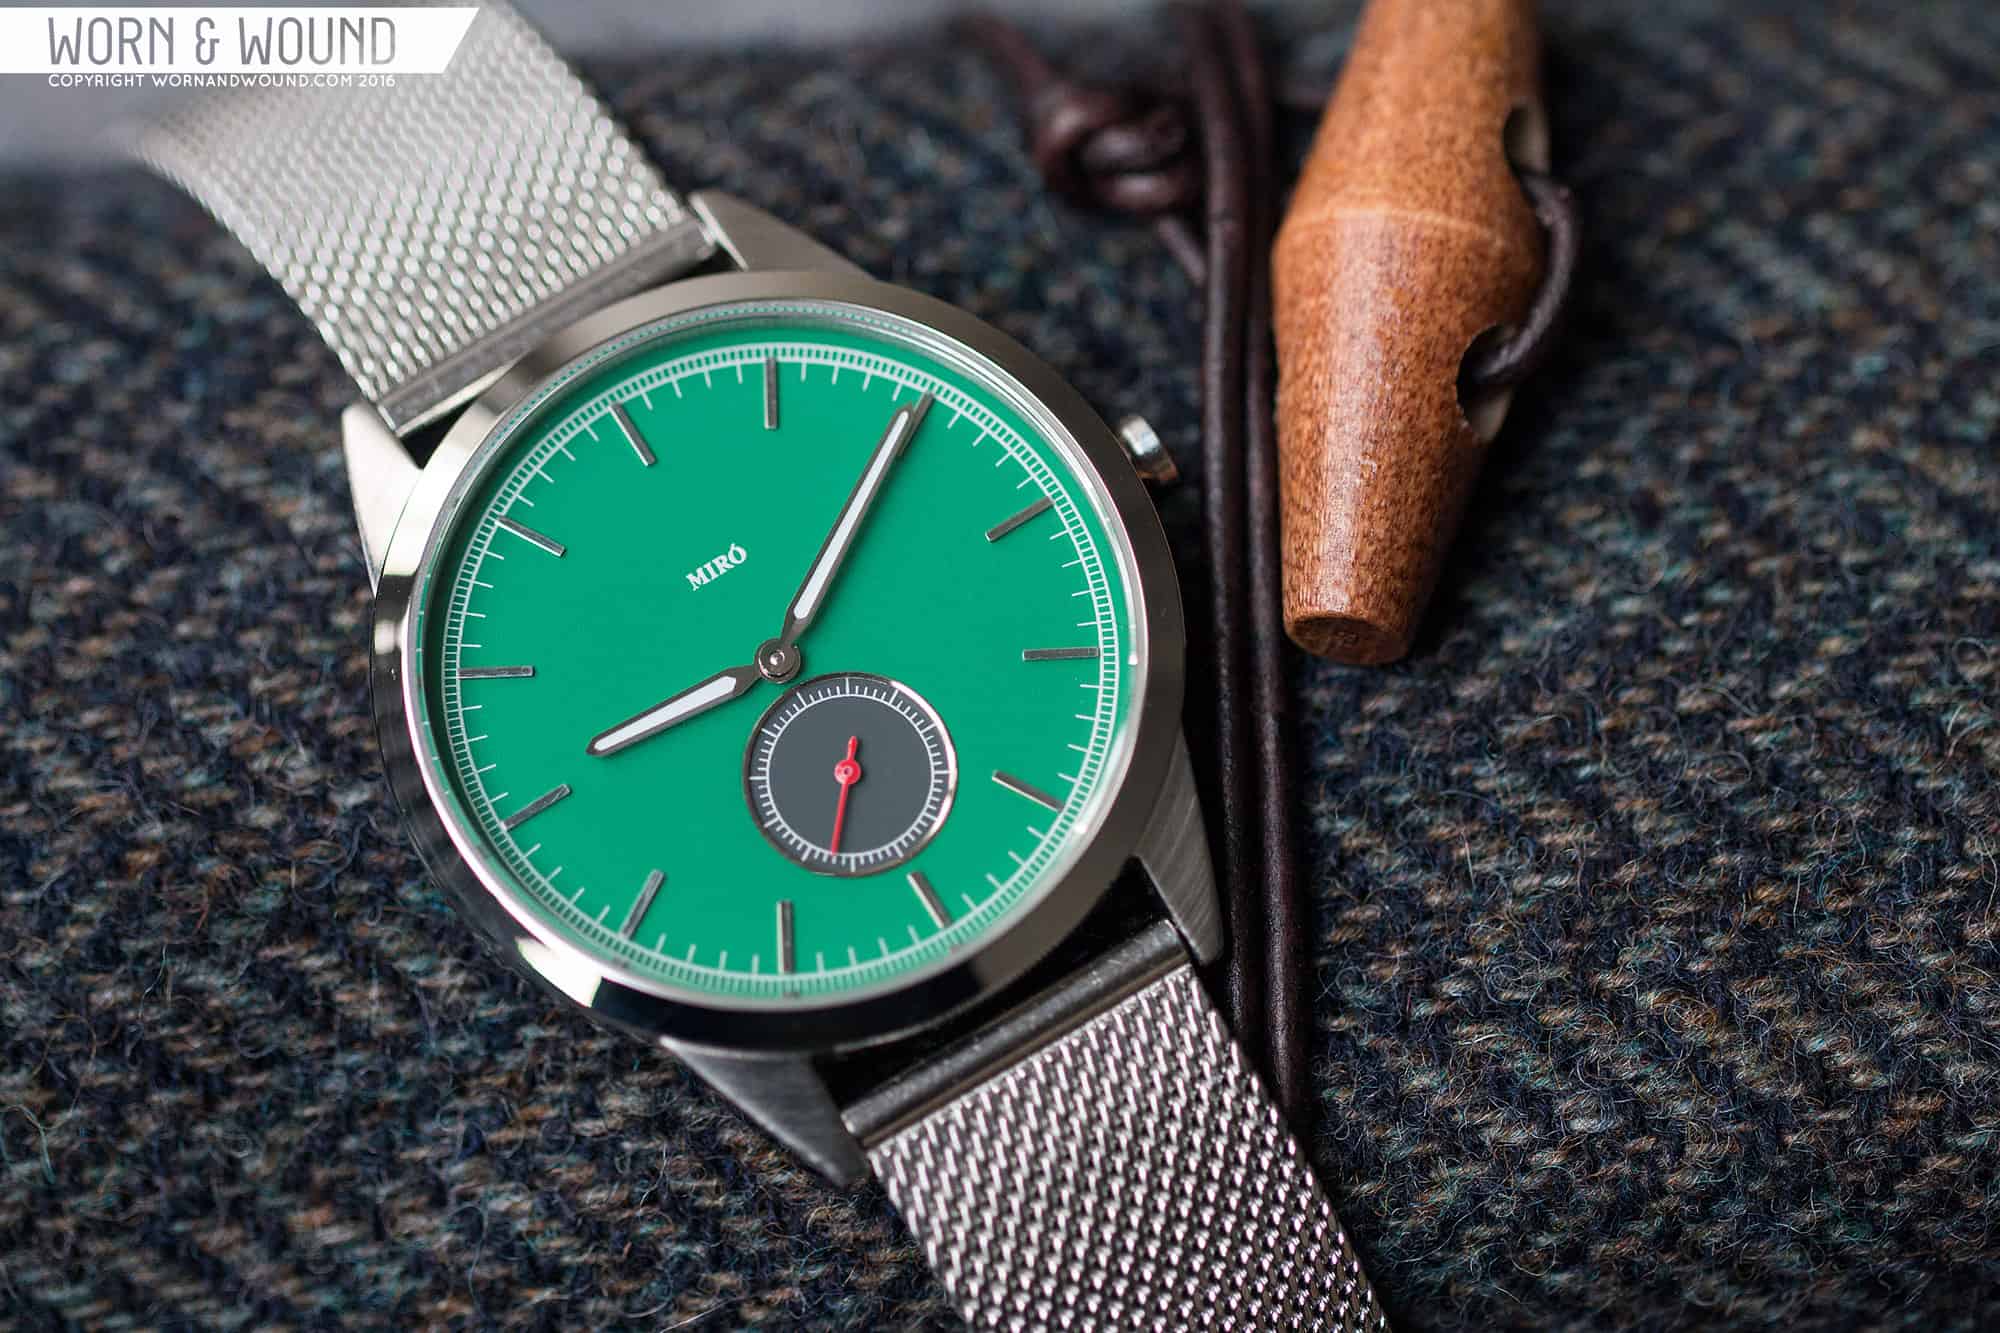 Hands-On Video: Two Affordable, Unisex Miró Watches - Worn & Wound